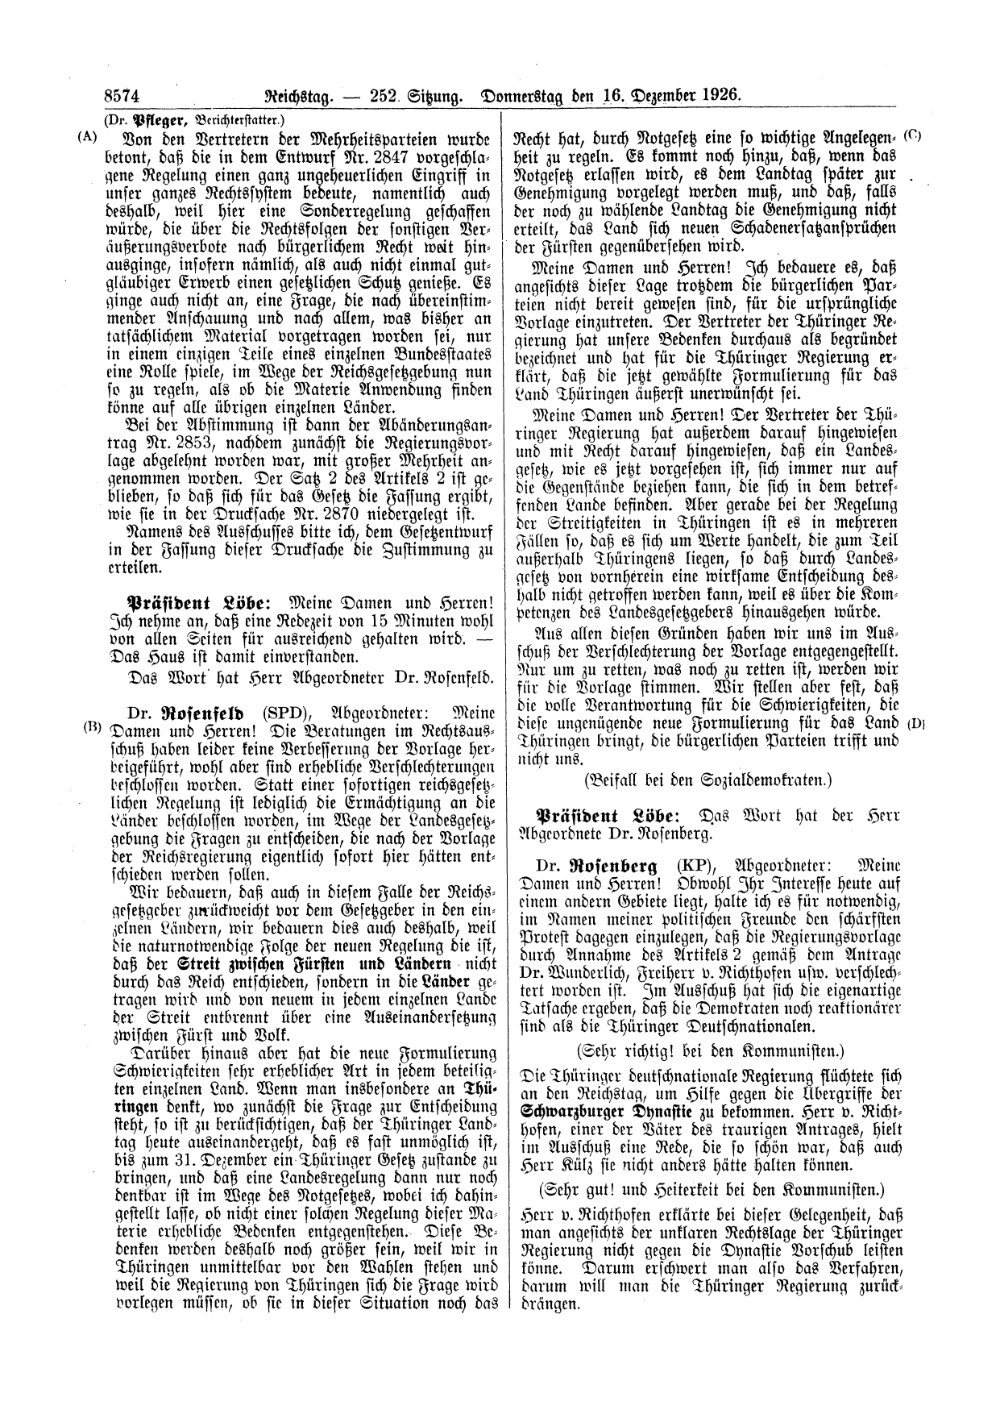 Scan of page 8574